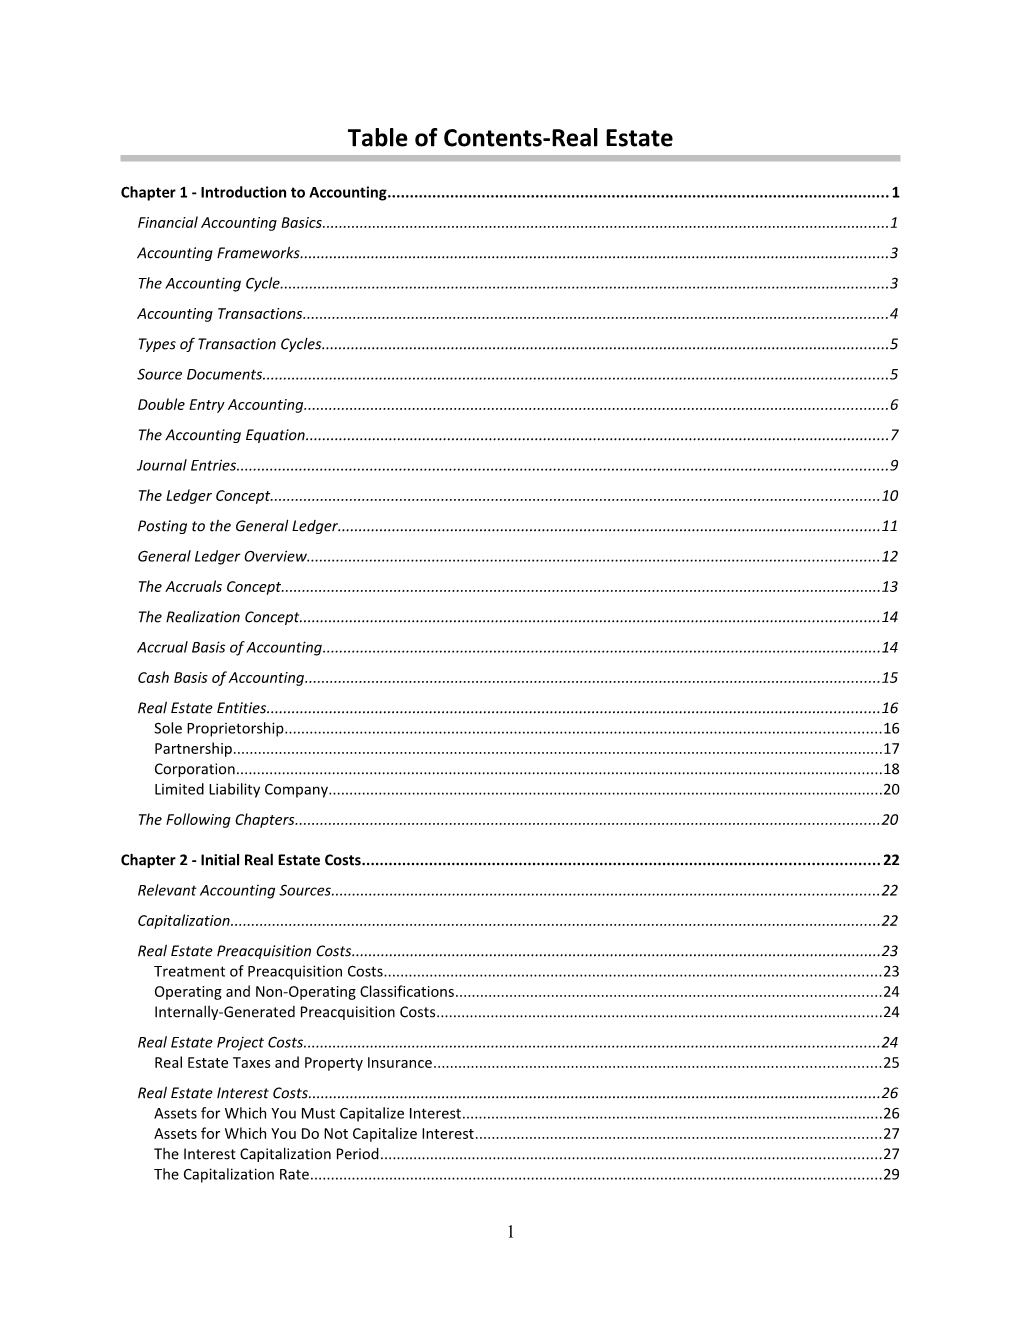 Table of Contents-Real Estate